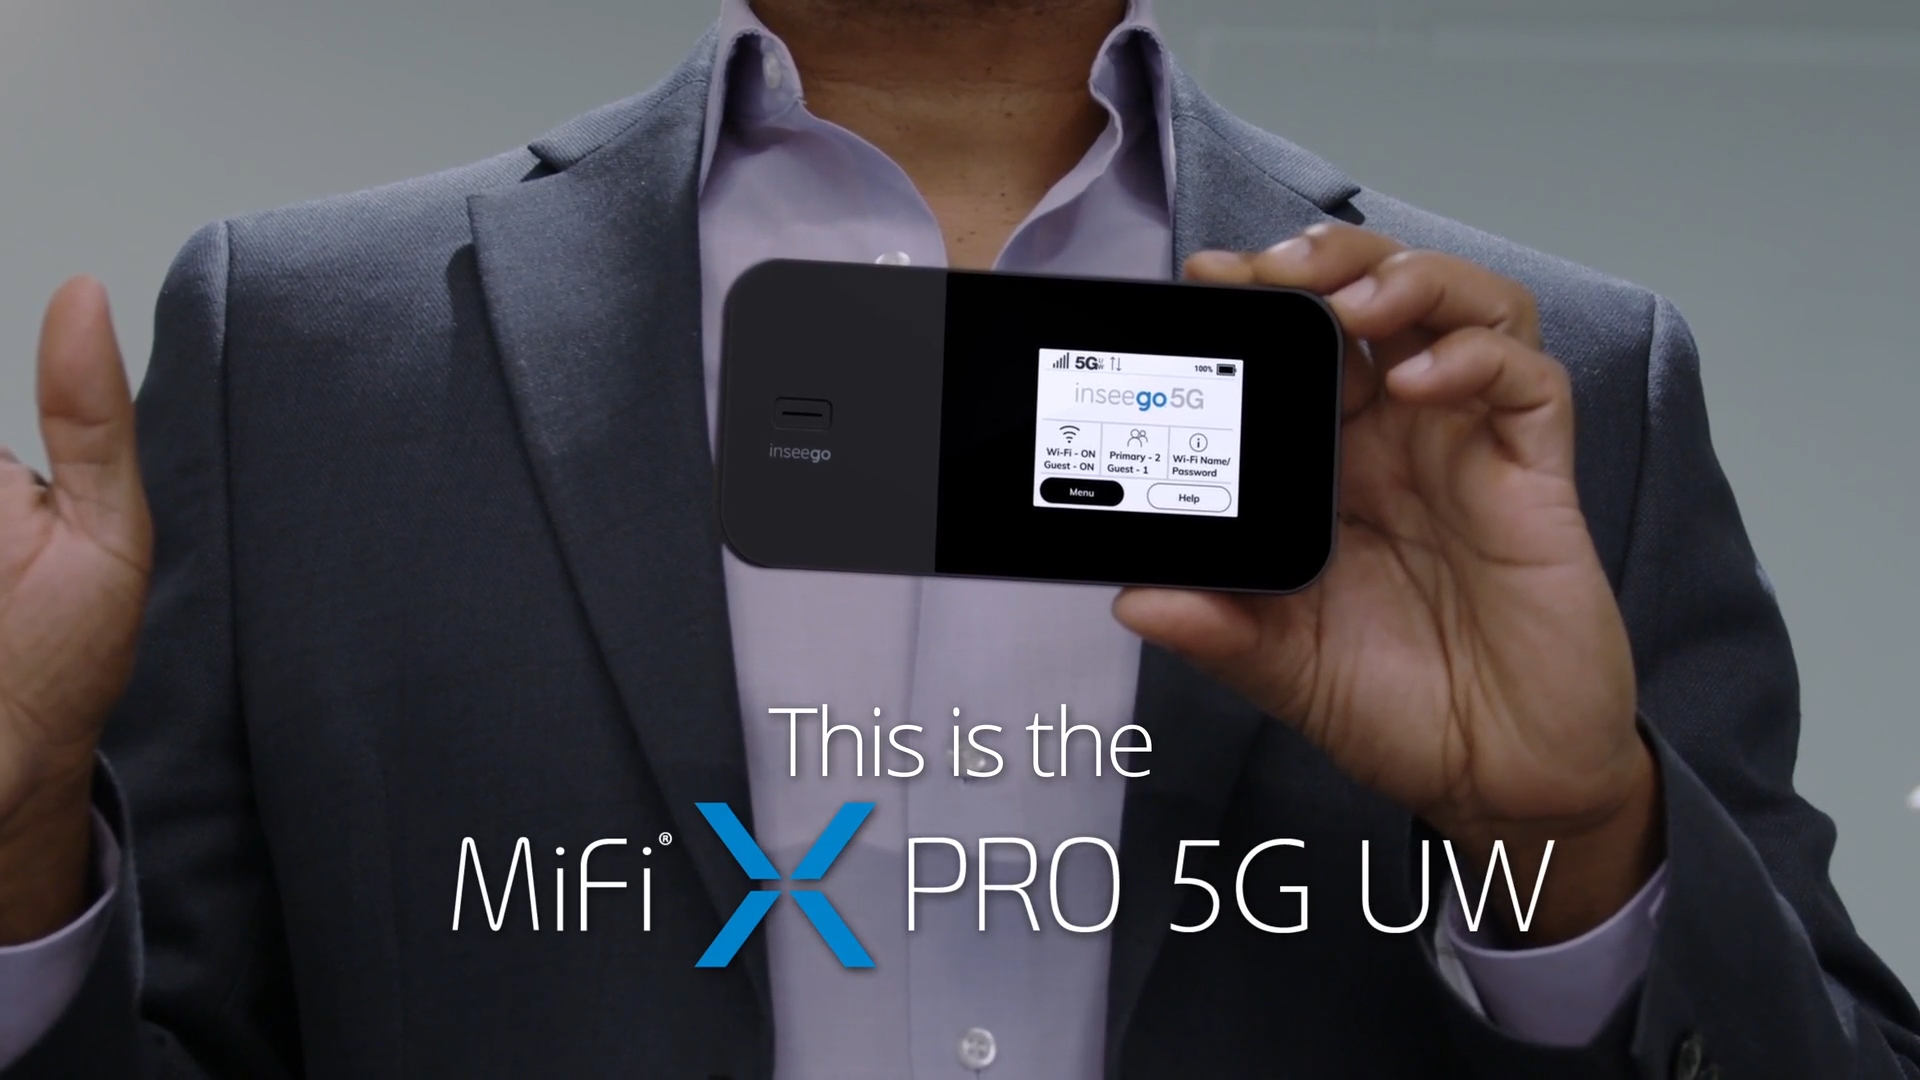 The Inseego MiFi® X PRO 5G UW hotspot is now available at Verizon.